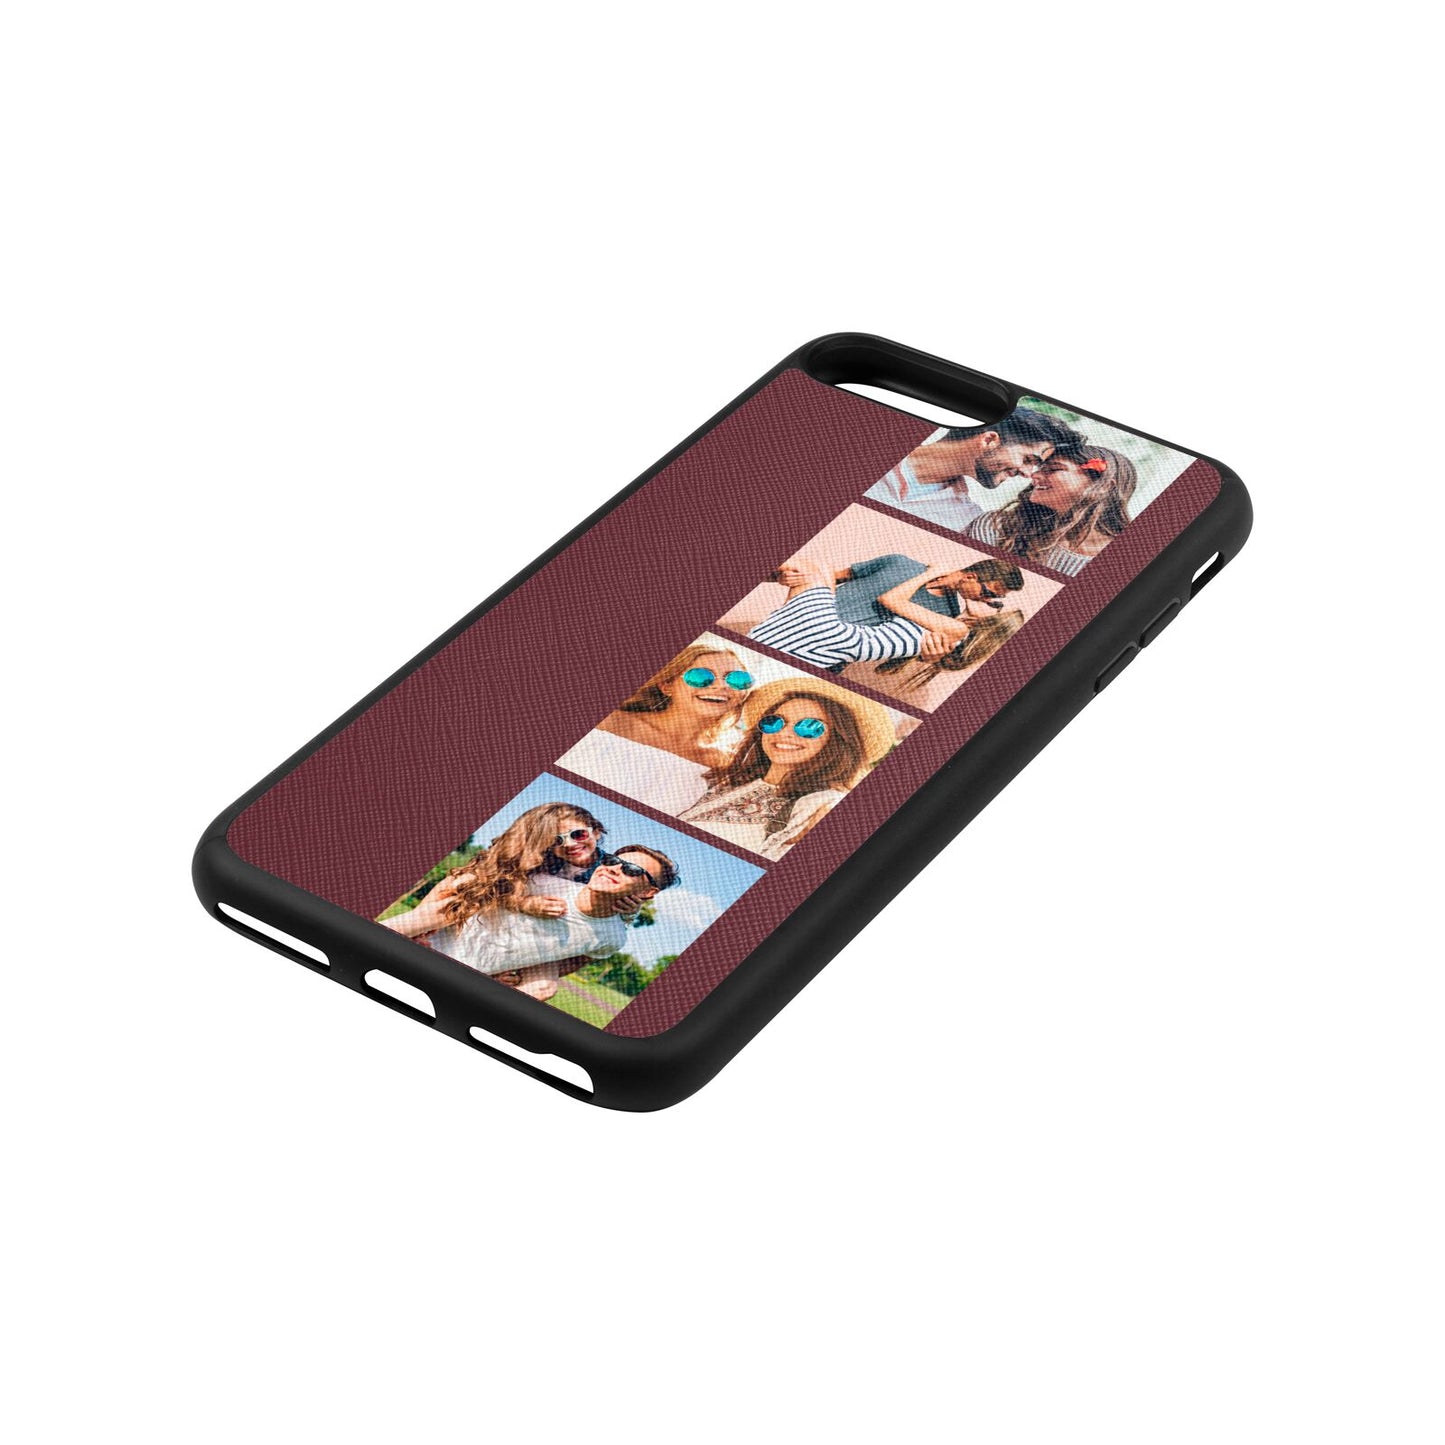 Photo Strip Montage Upload Rose Brown Saffiano Leather iPhone 8 Plus Case Side Angle